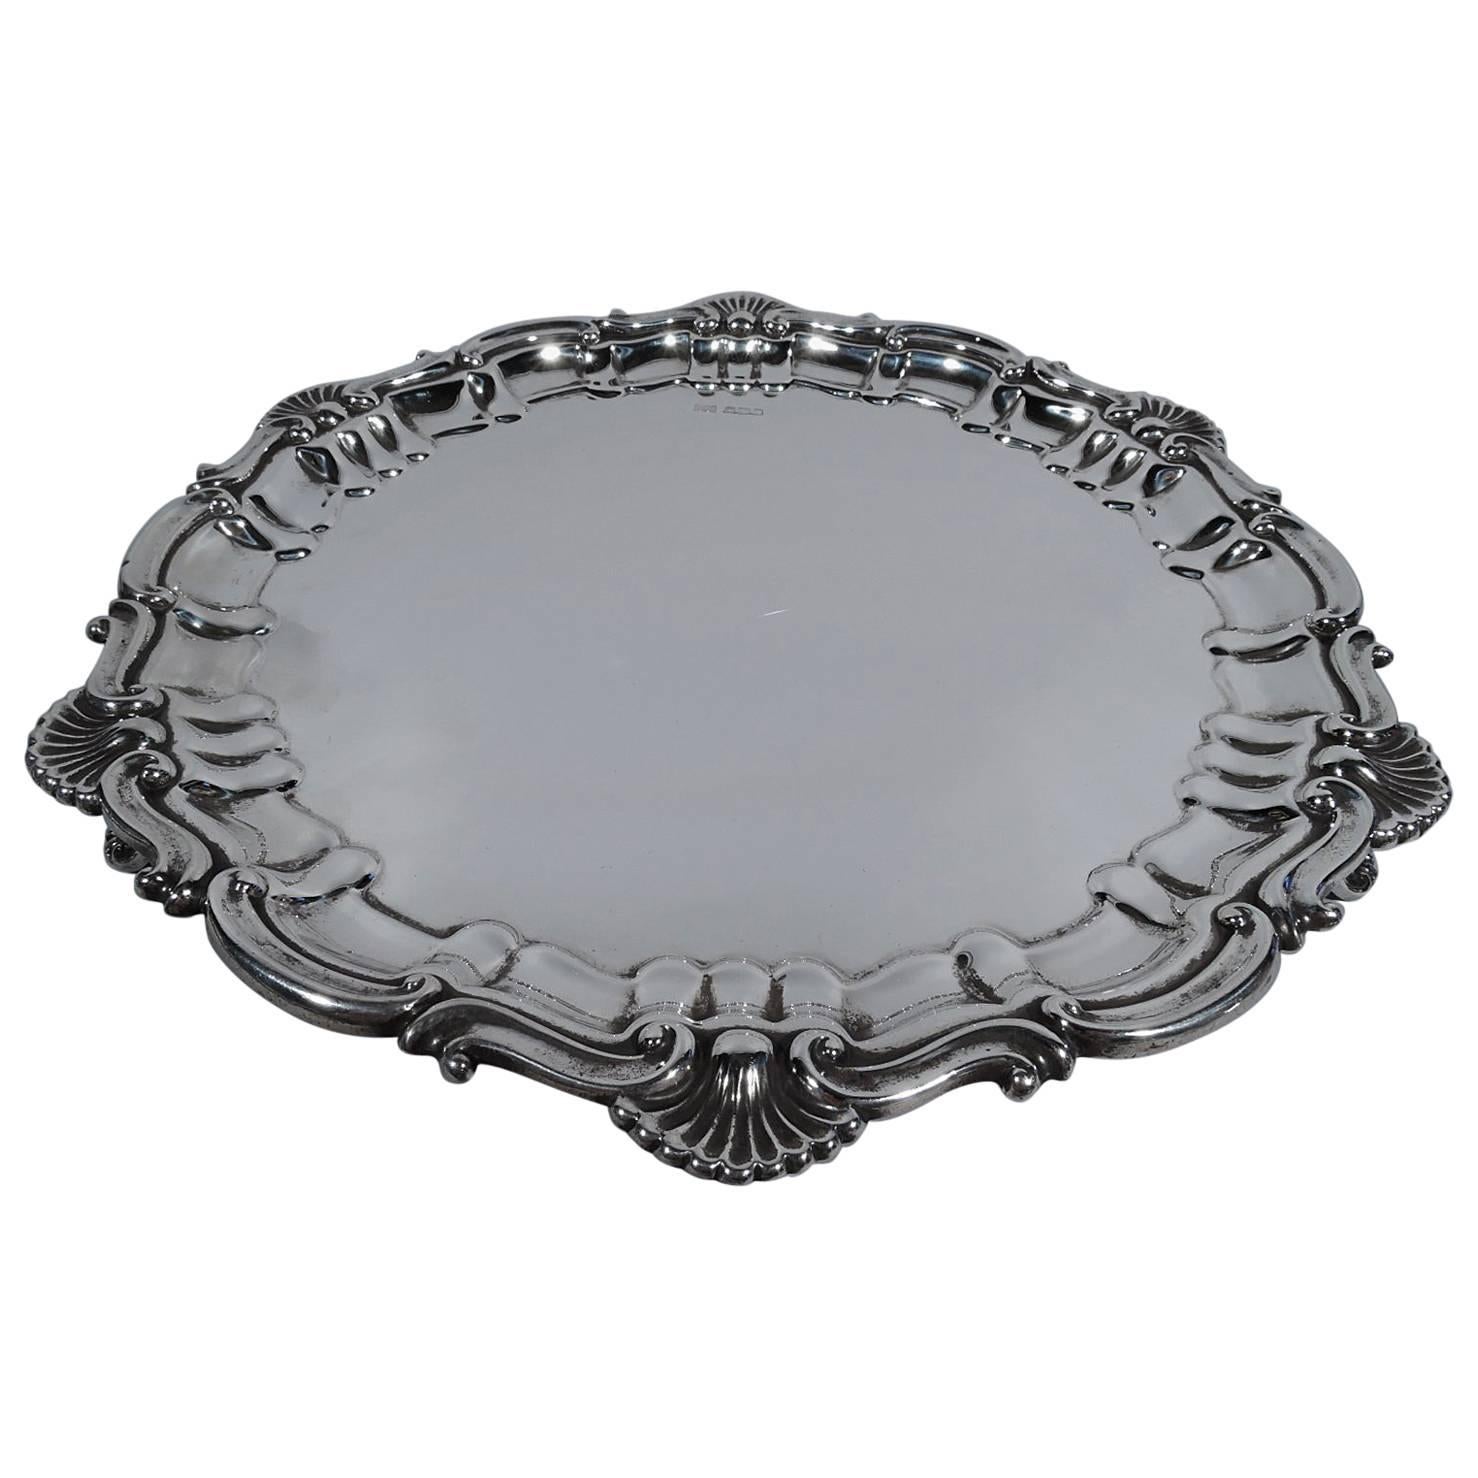 Antique English Georgian Shell and Scroll Sterling Silver Salver Tray